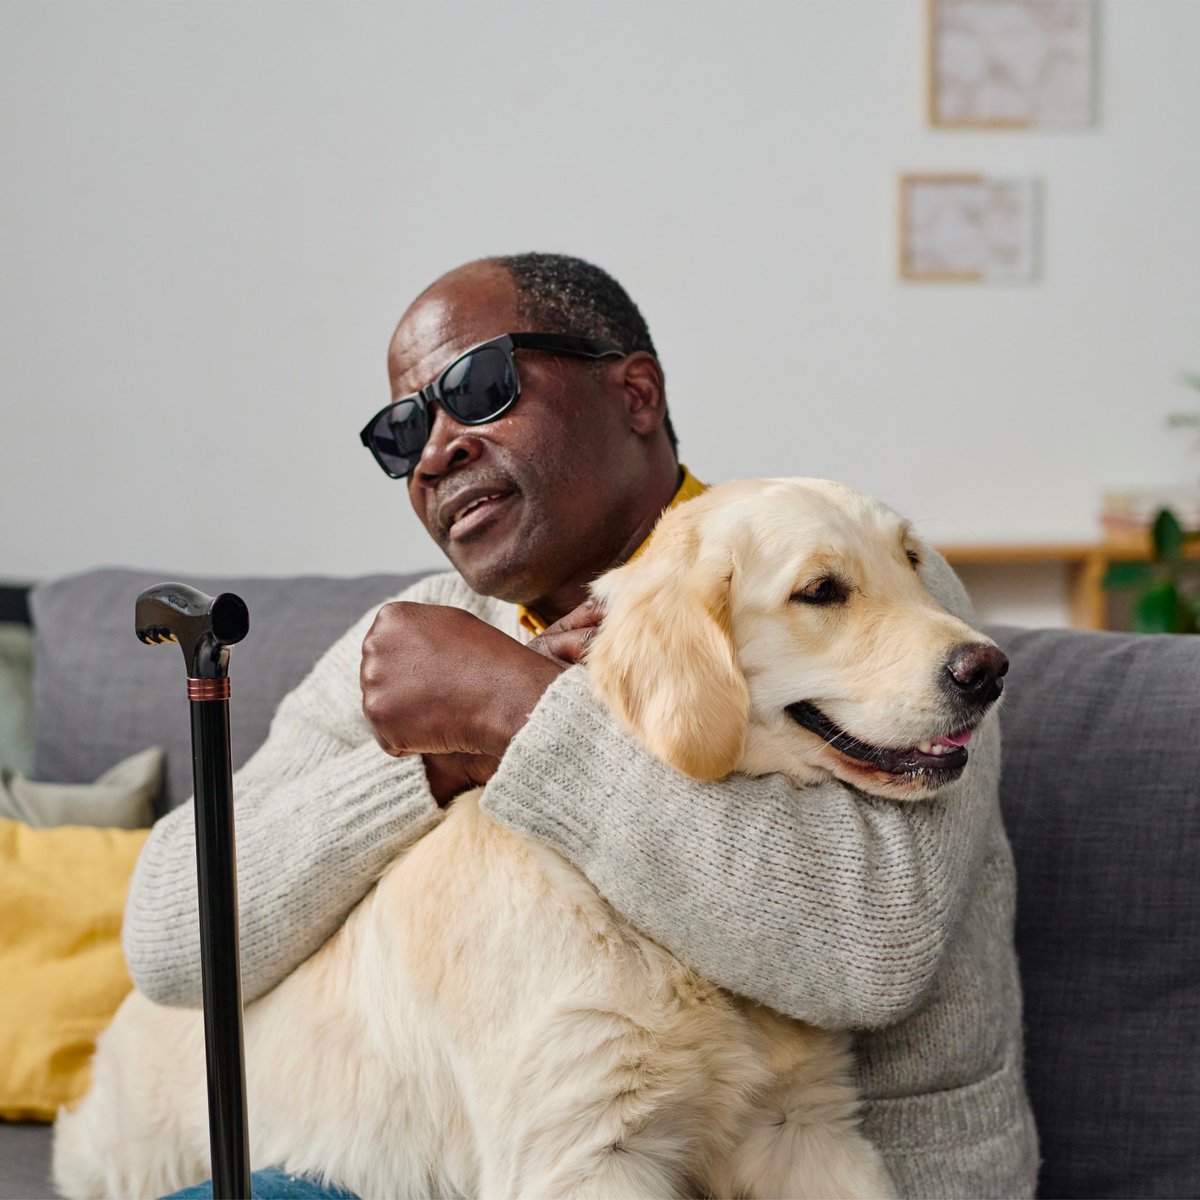 Today, on International Guide Dog Day, we celebrate and honor the incredible bond between humans and their devoted 4-legged companions who tirelessly serve as their eyes, ears, and steadfast partners in navigating the world!
#GuideDogs #GuideDogTeams #AssistanceDogs #ServiceDogs